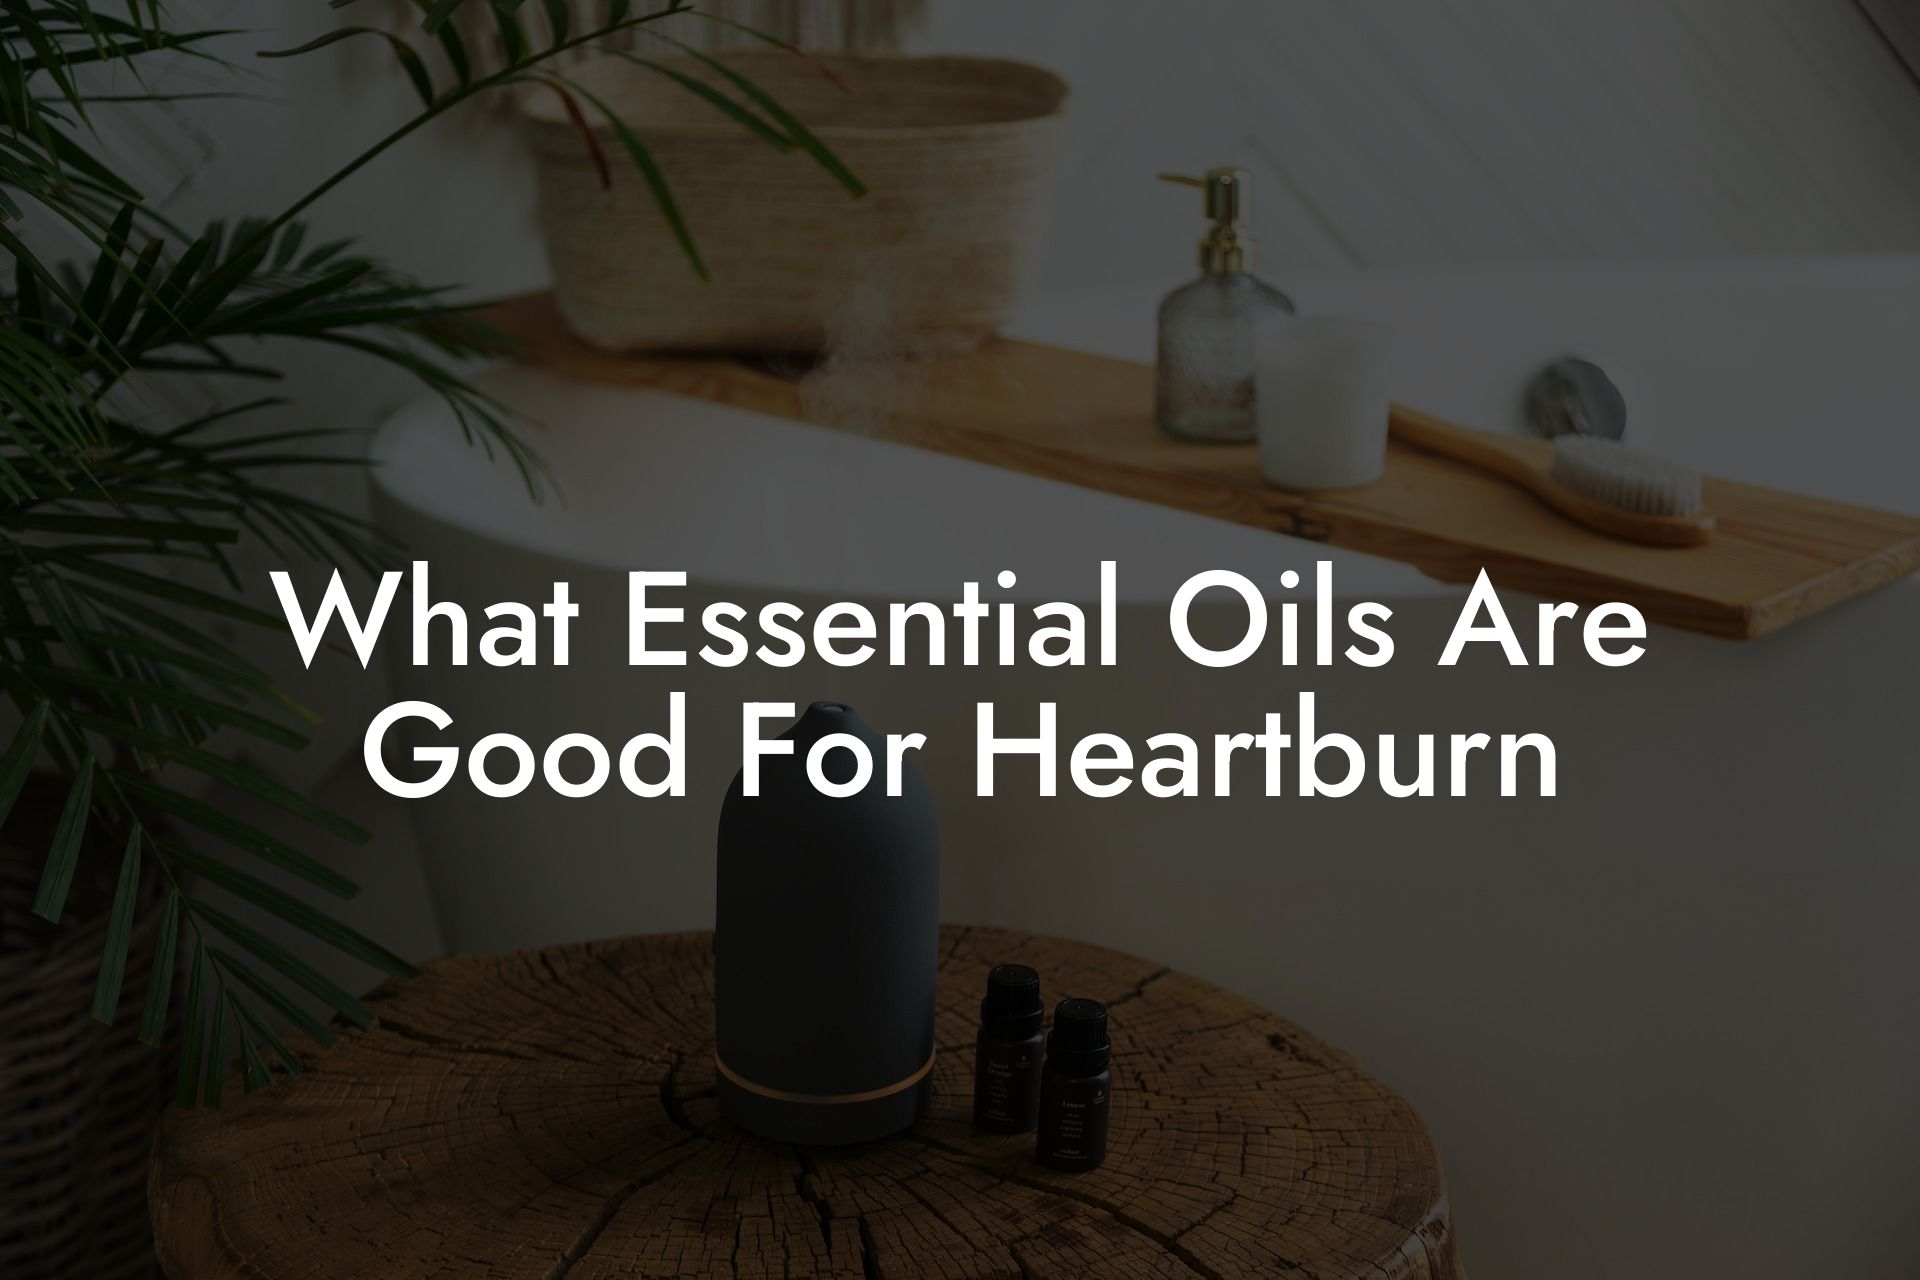 What Essential Oils Are Good For Heartburn